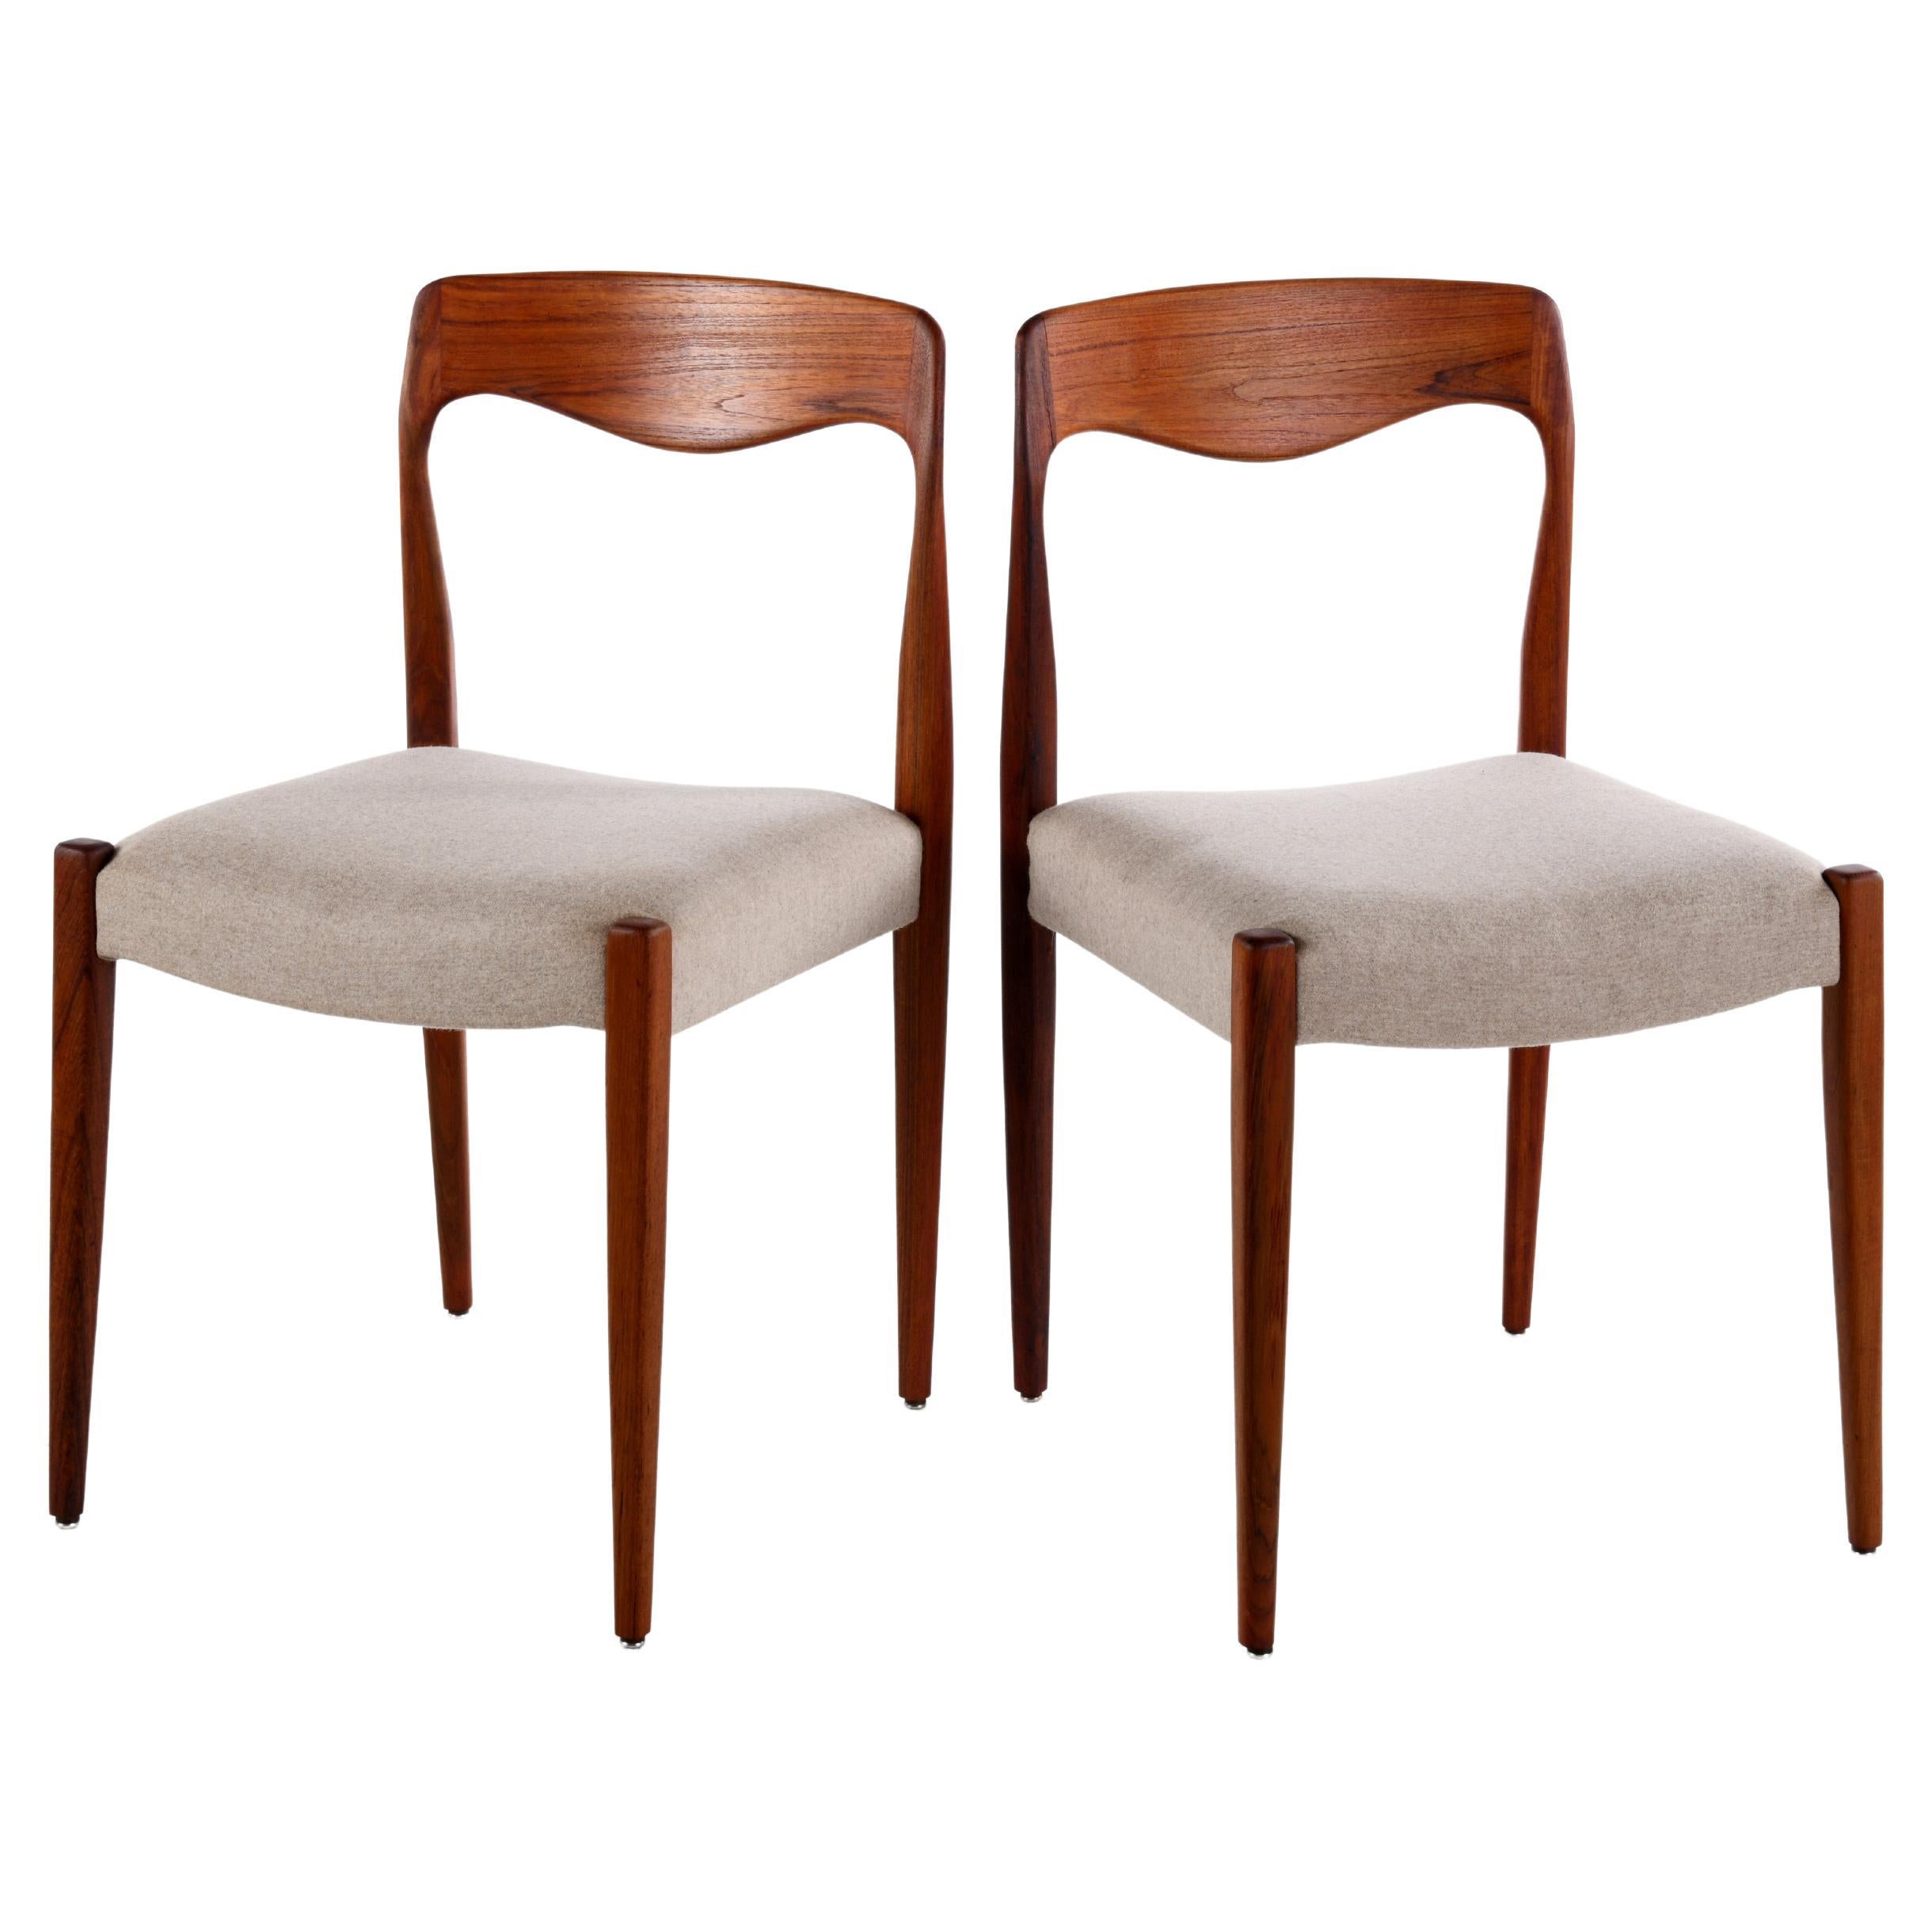 Pair of vintage Scandinavian chairs in the style of Niels Otto Møller